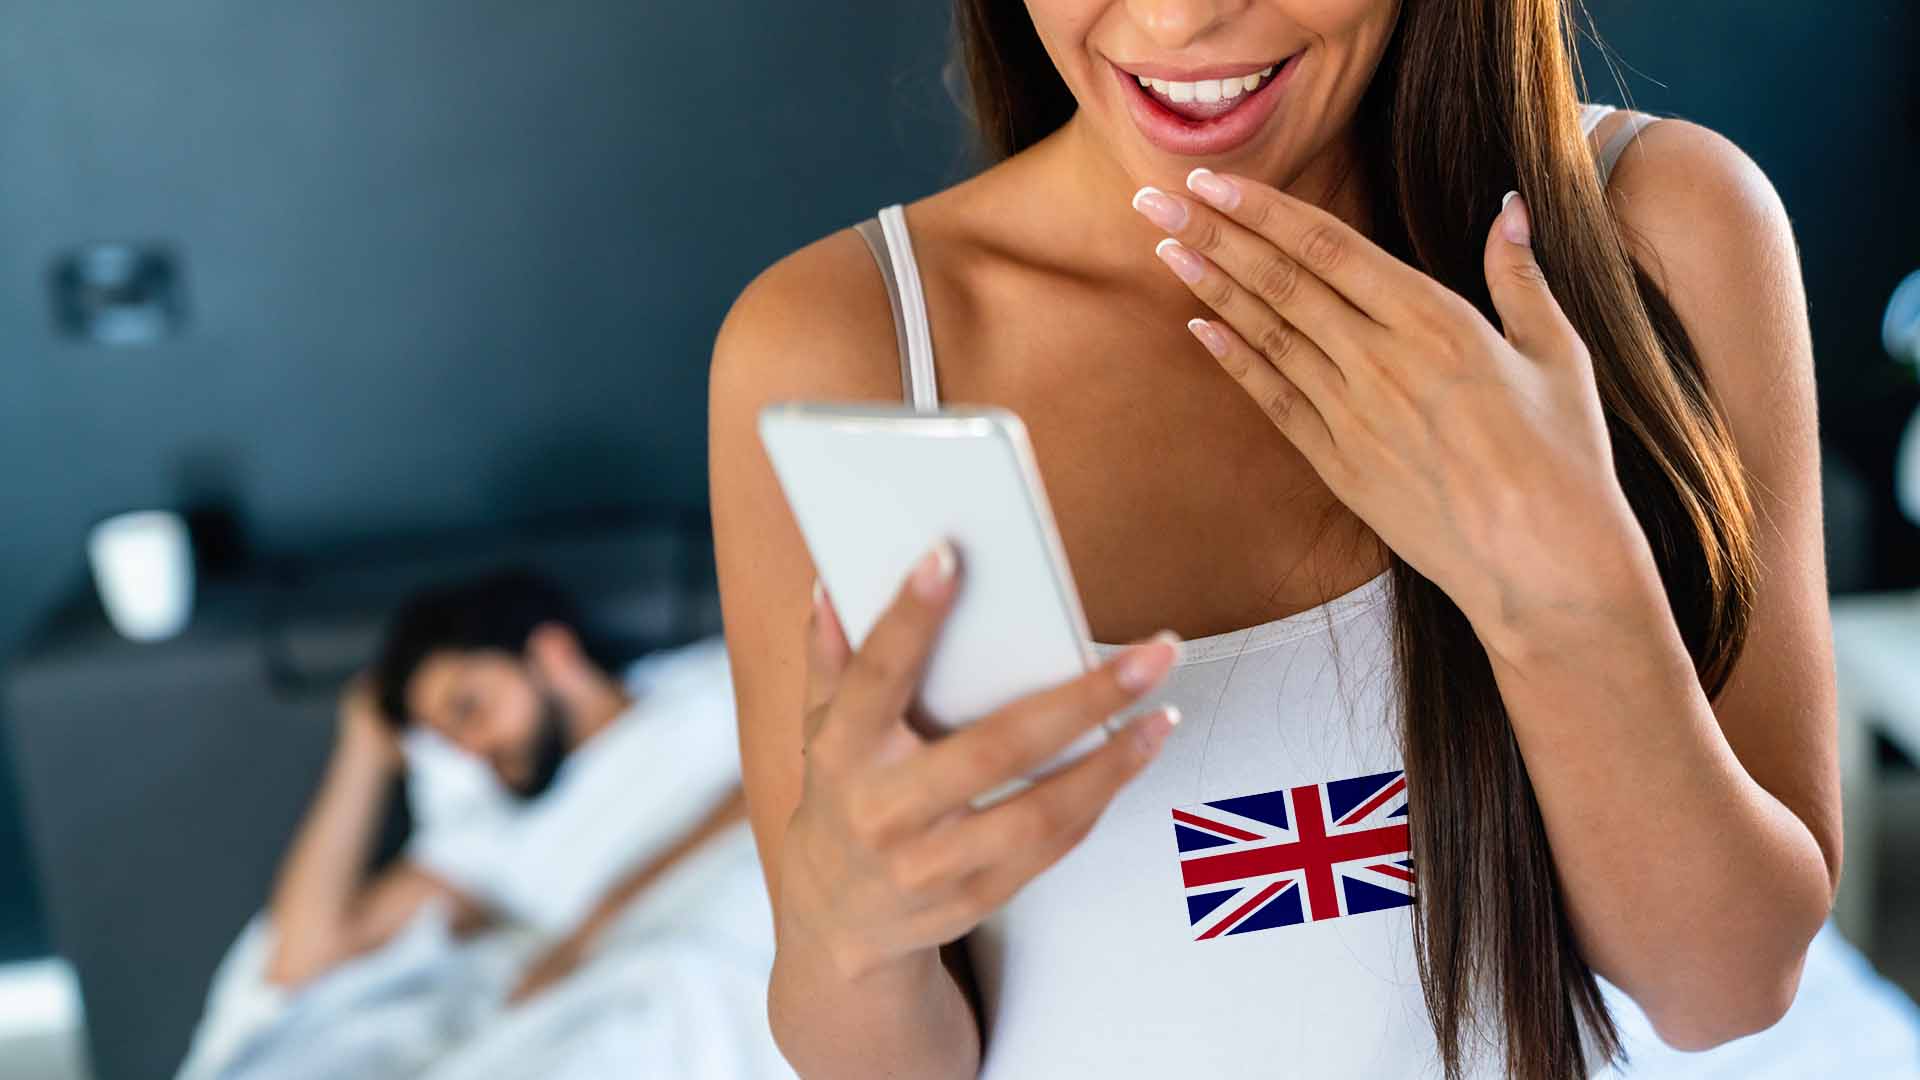 Brunette woman in white shirt with UK flag on it, holding her phone and smiling with brunette man sleeping in bed behind her.